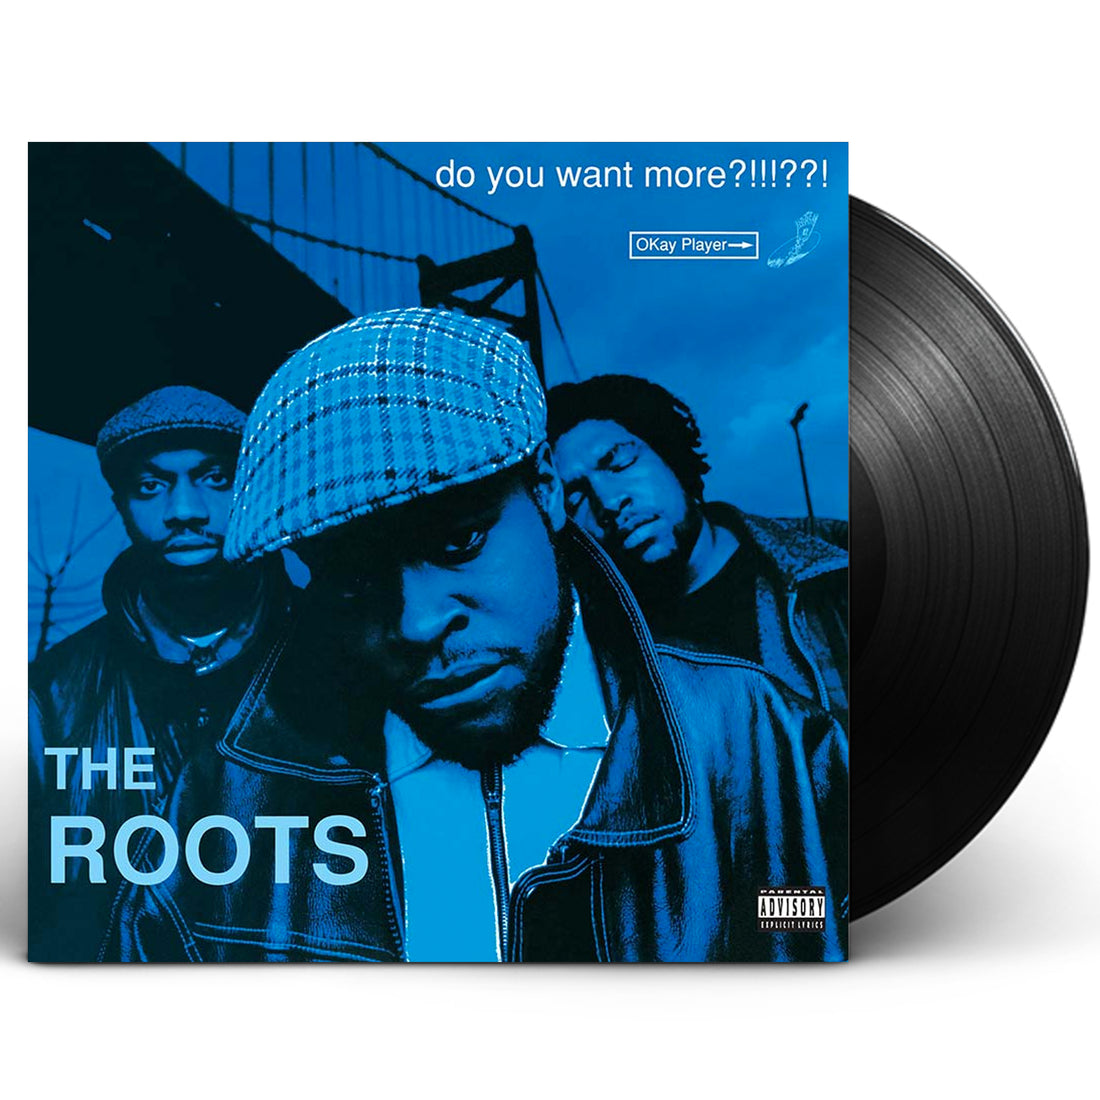 The Roots "Do You Want More?!!!??!" 2xLP Vinyl